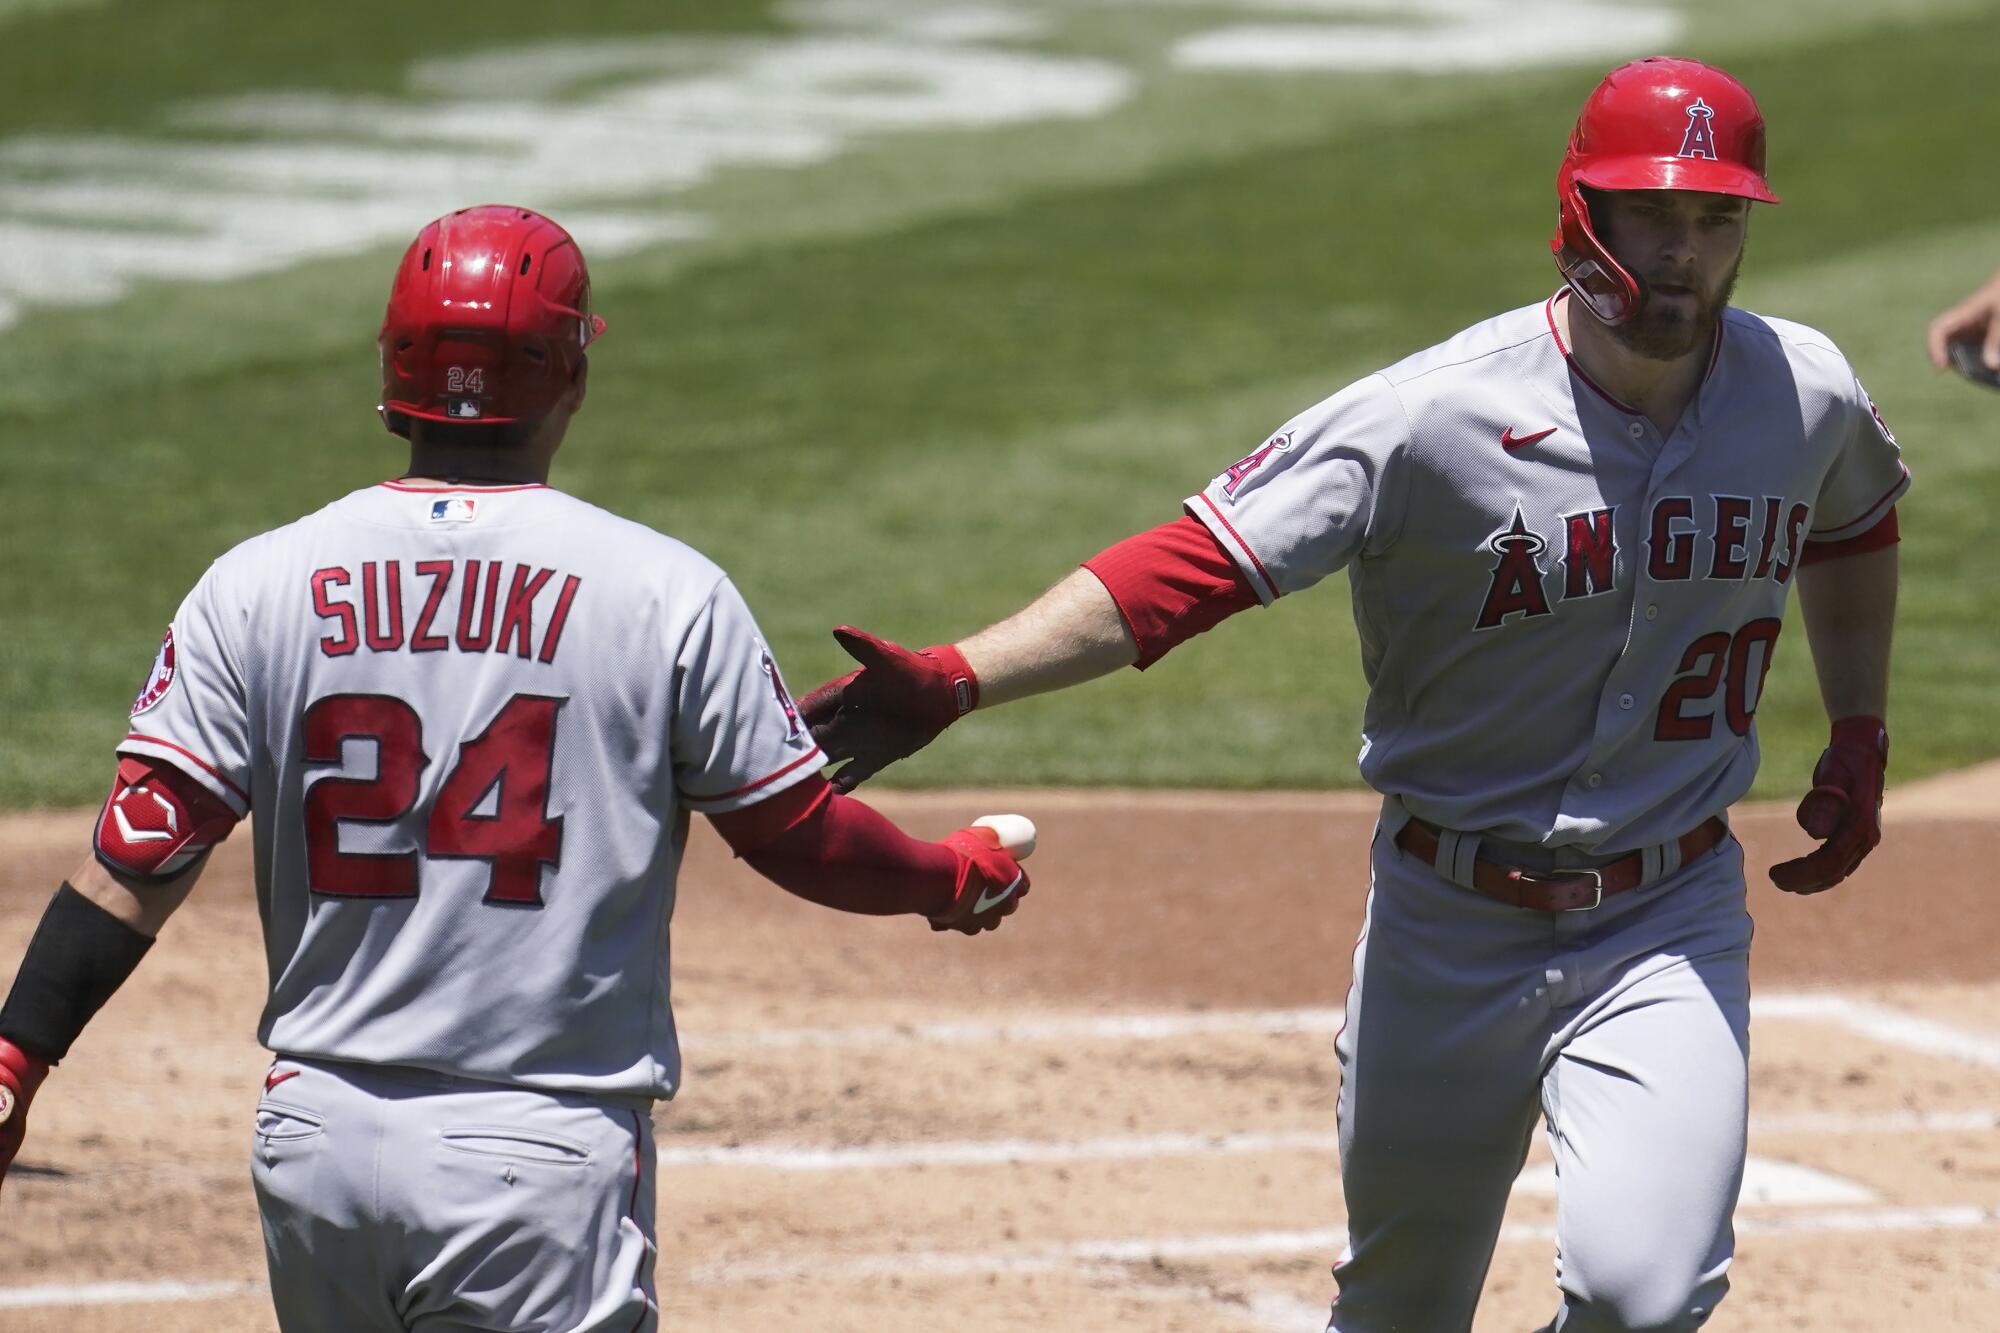 Jared Walsh, right, is congratulated by Angels teammate Kurt Suzuki after hitting a solo home run.